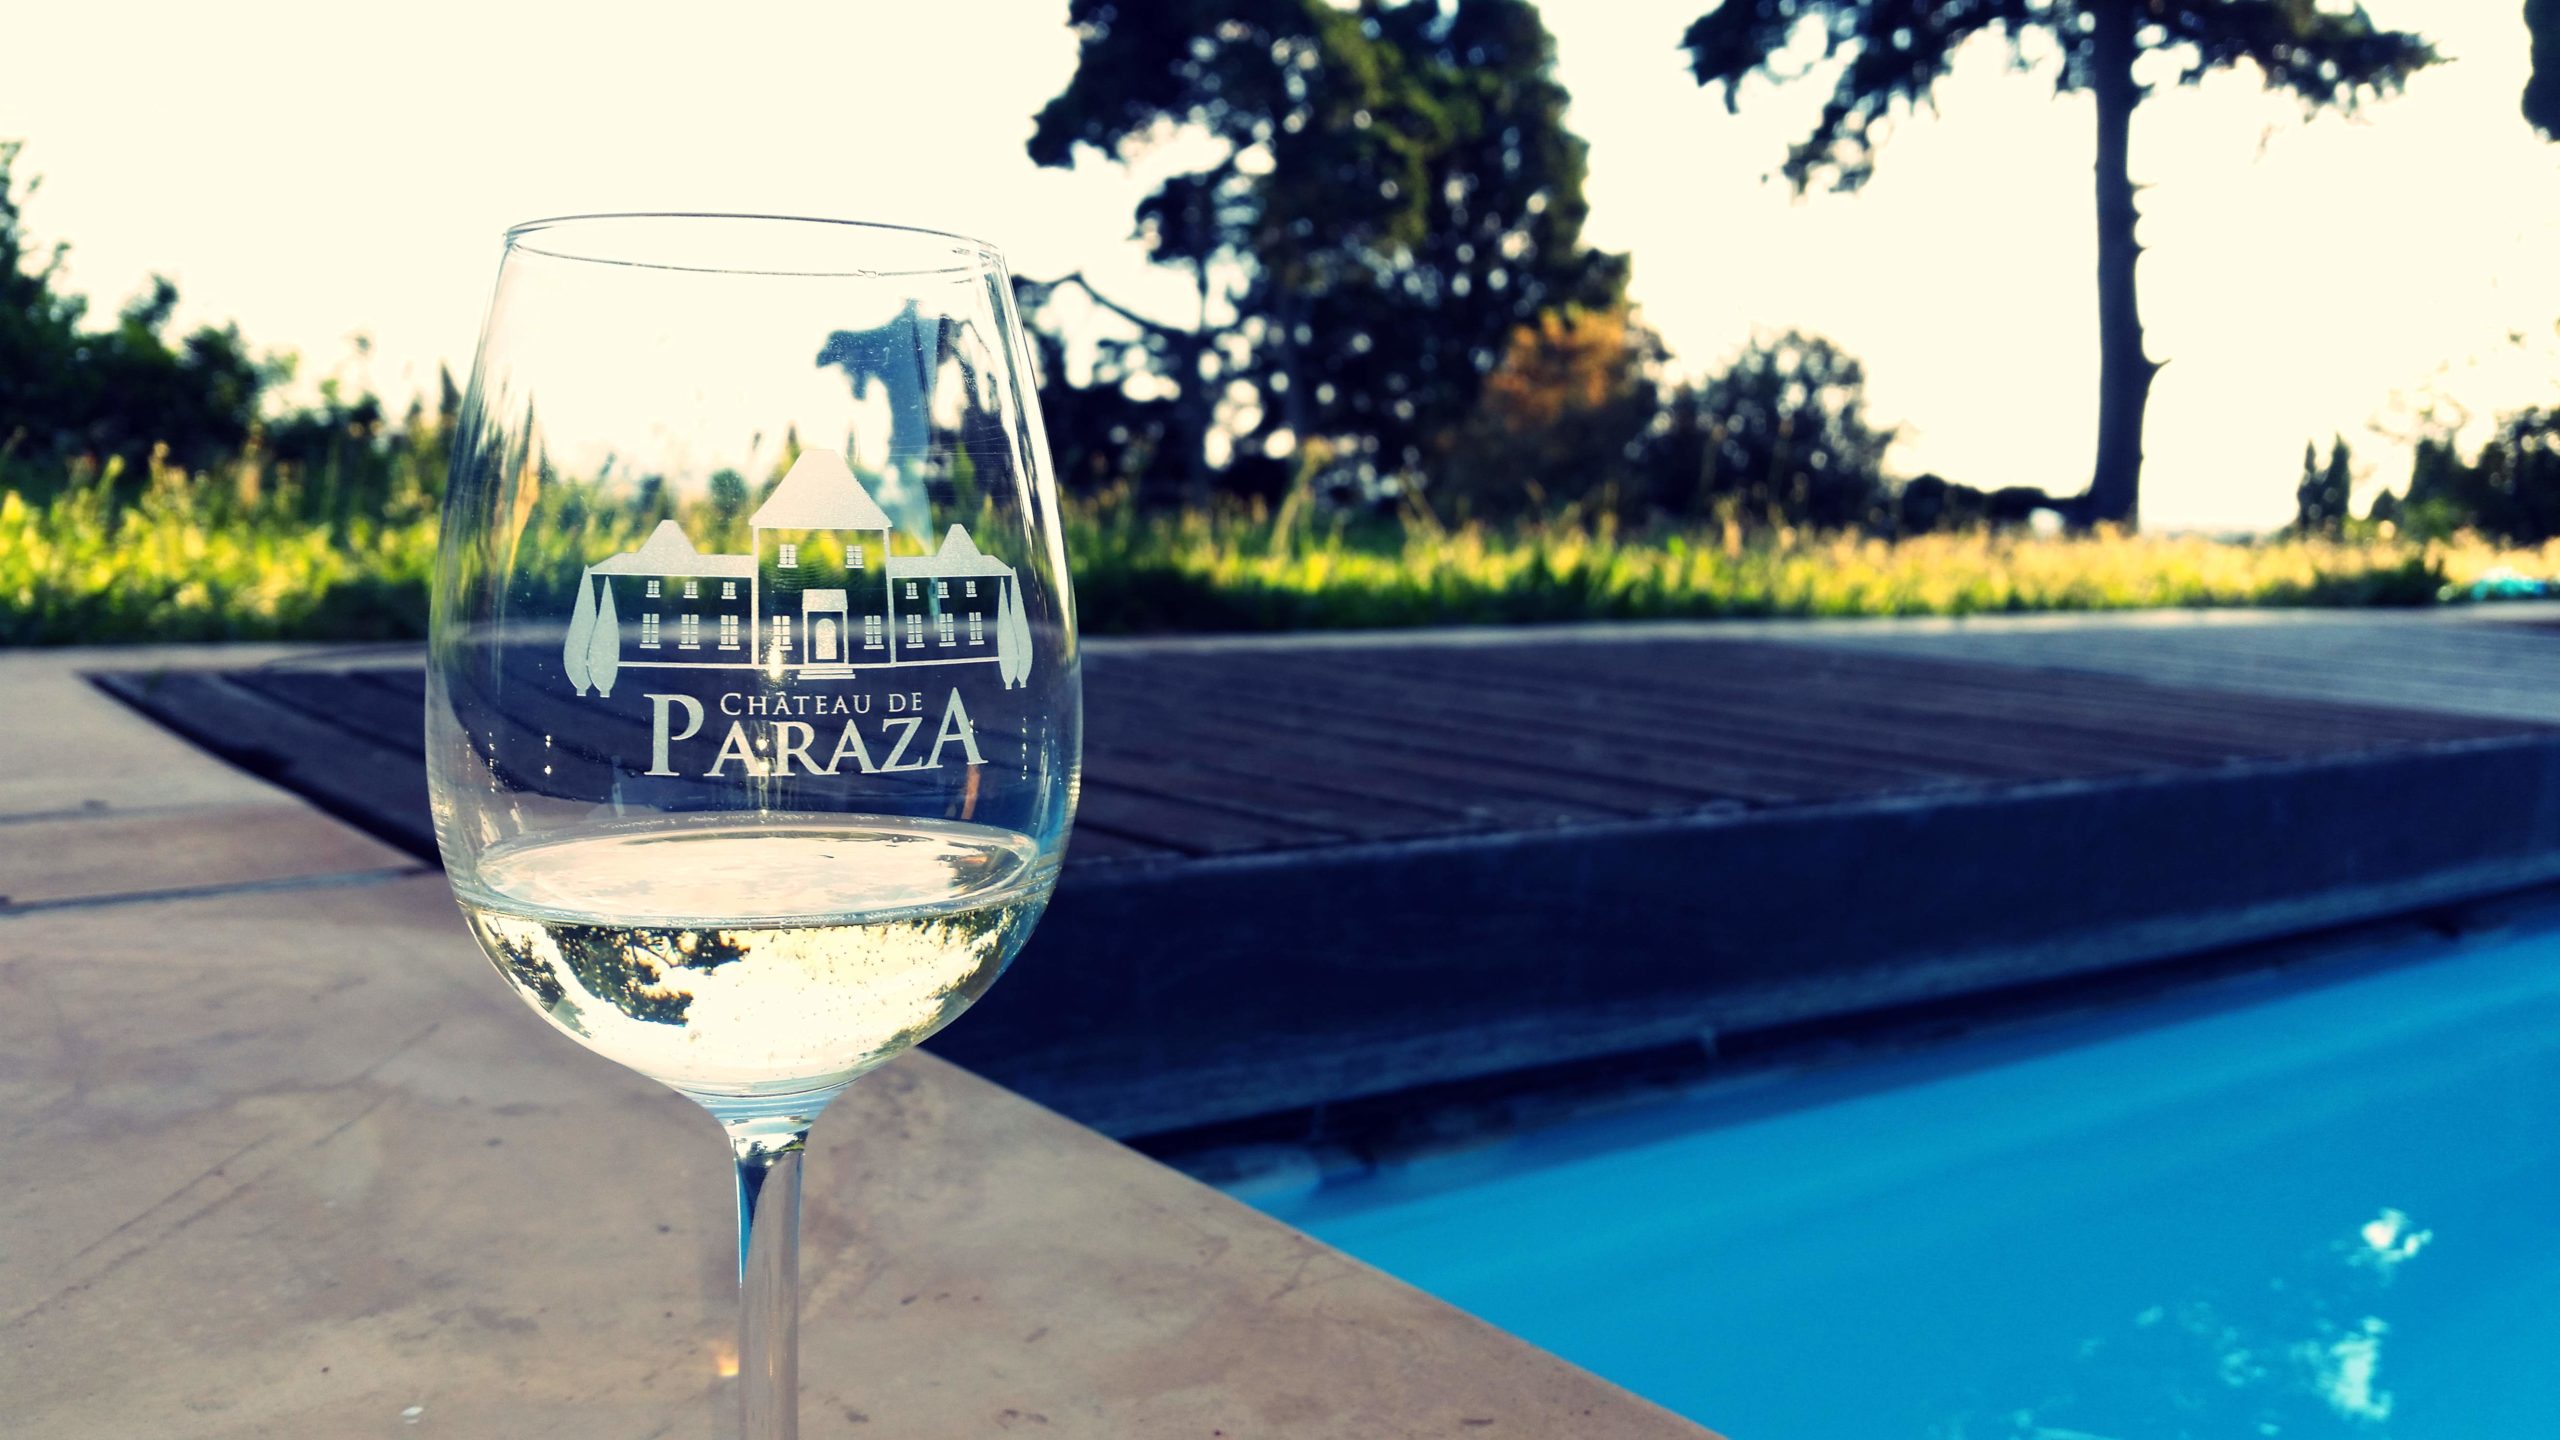 Chateau de Paraza by the pool